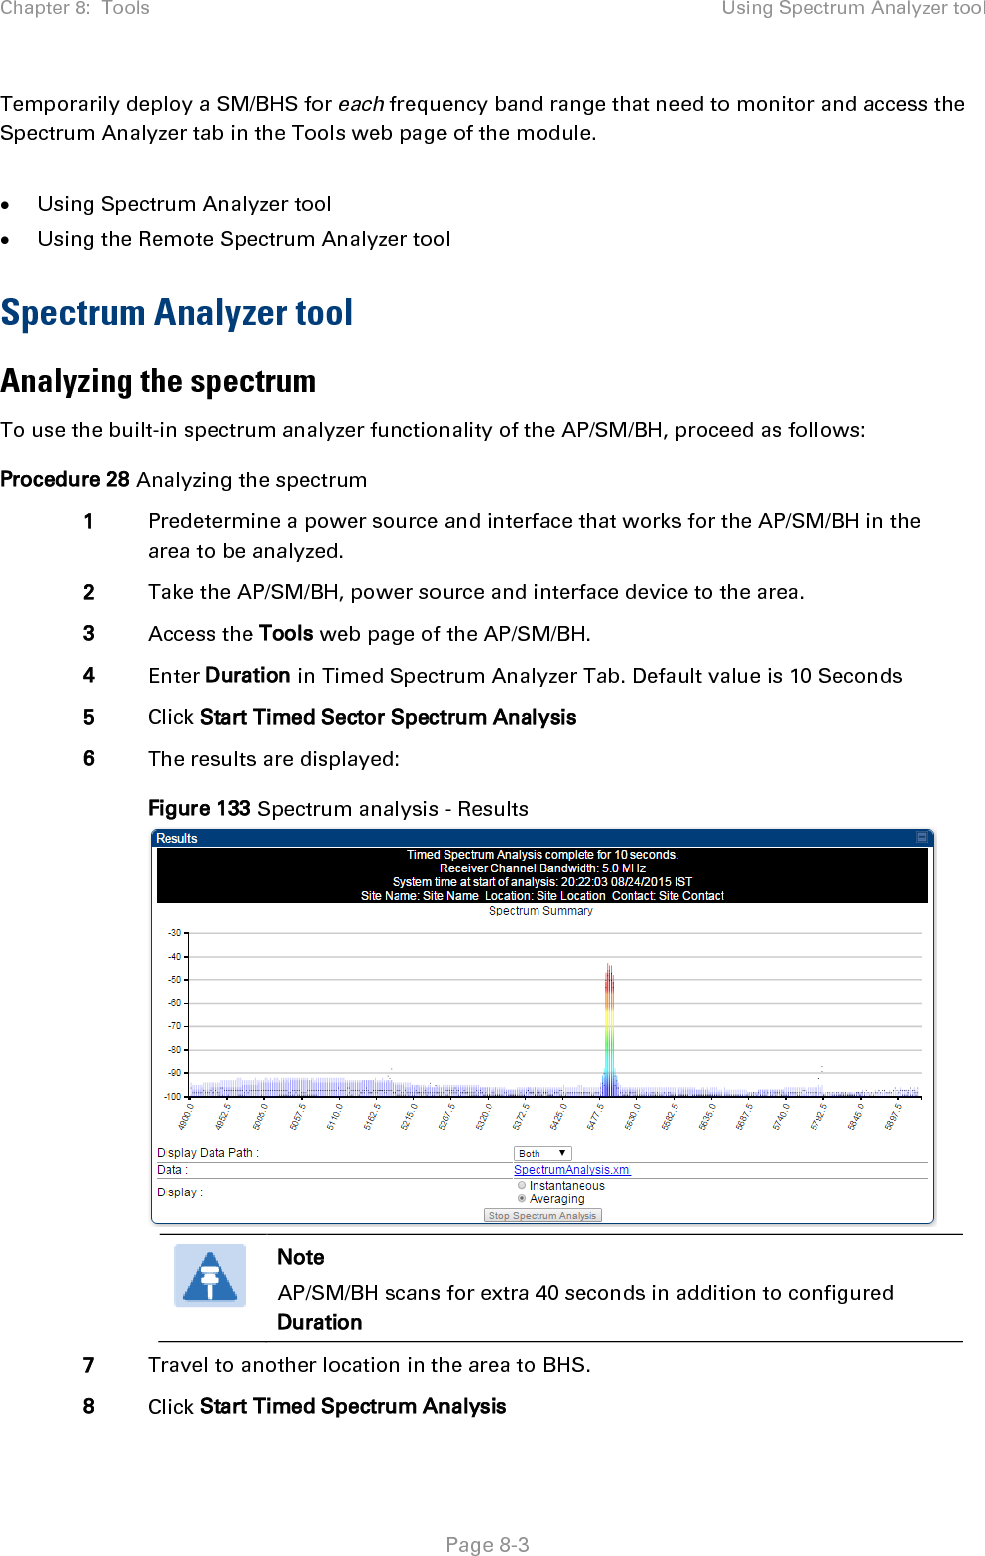 Chapter 8:  Tools Using Spectrum Analyzer tool   Page 8-3 Temporarily deploy a SM/BHS for each frequency band range that need to monitor and access the Spectrum Analyzer tab in the Tools web page of the module.   • Using Spectrum Analyzer tool • Using the Remote Spectrum Analyzer tool Spectrum Analyzer tool Analyzing the spectrum To use the built-in spectrum analyzer functionality of the AP/SM/BH, proceed as follows: Procedure 28 Analyzing the spectrum 1 Predetermine a power source and interface that works for the AP/SM/BH in the area to be analyzed. 2 Take the AP/SM/BH, power source and interface device to the area. 3 Access the Tools web page of the AP/SM/BH. 4 Enter Duration in Timed Spectrum Analyzer Tab. Default value is 10 Seconds 5 Click Start Timed Sector Spectrum Analysis 6 The results are displayed: Figure 133 Spectrum analysis - Results   Note AP/SM/BH scans for extra 40 seconds in addition to configured Duration  7 Travel to another location in the area to BHS. 8 Click Start Timed Spectrum Analysis 